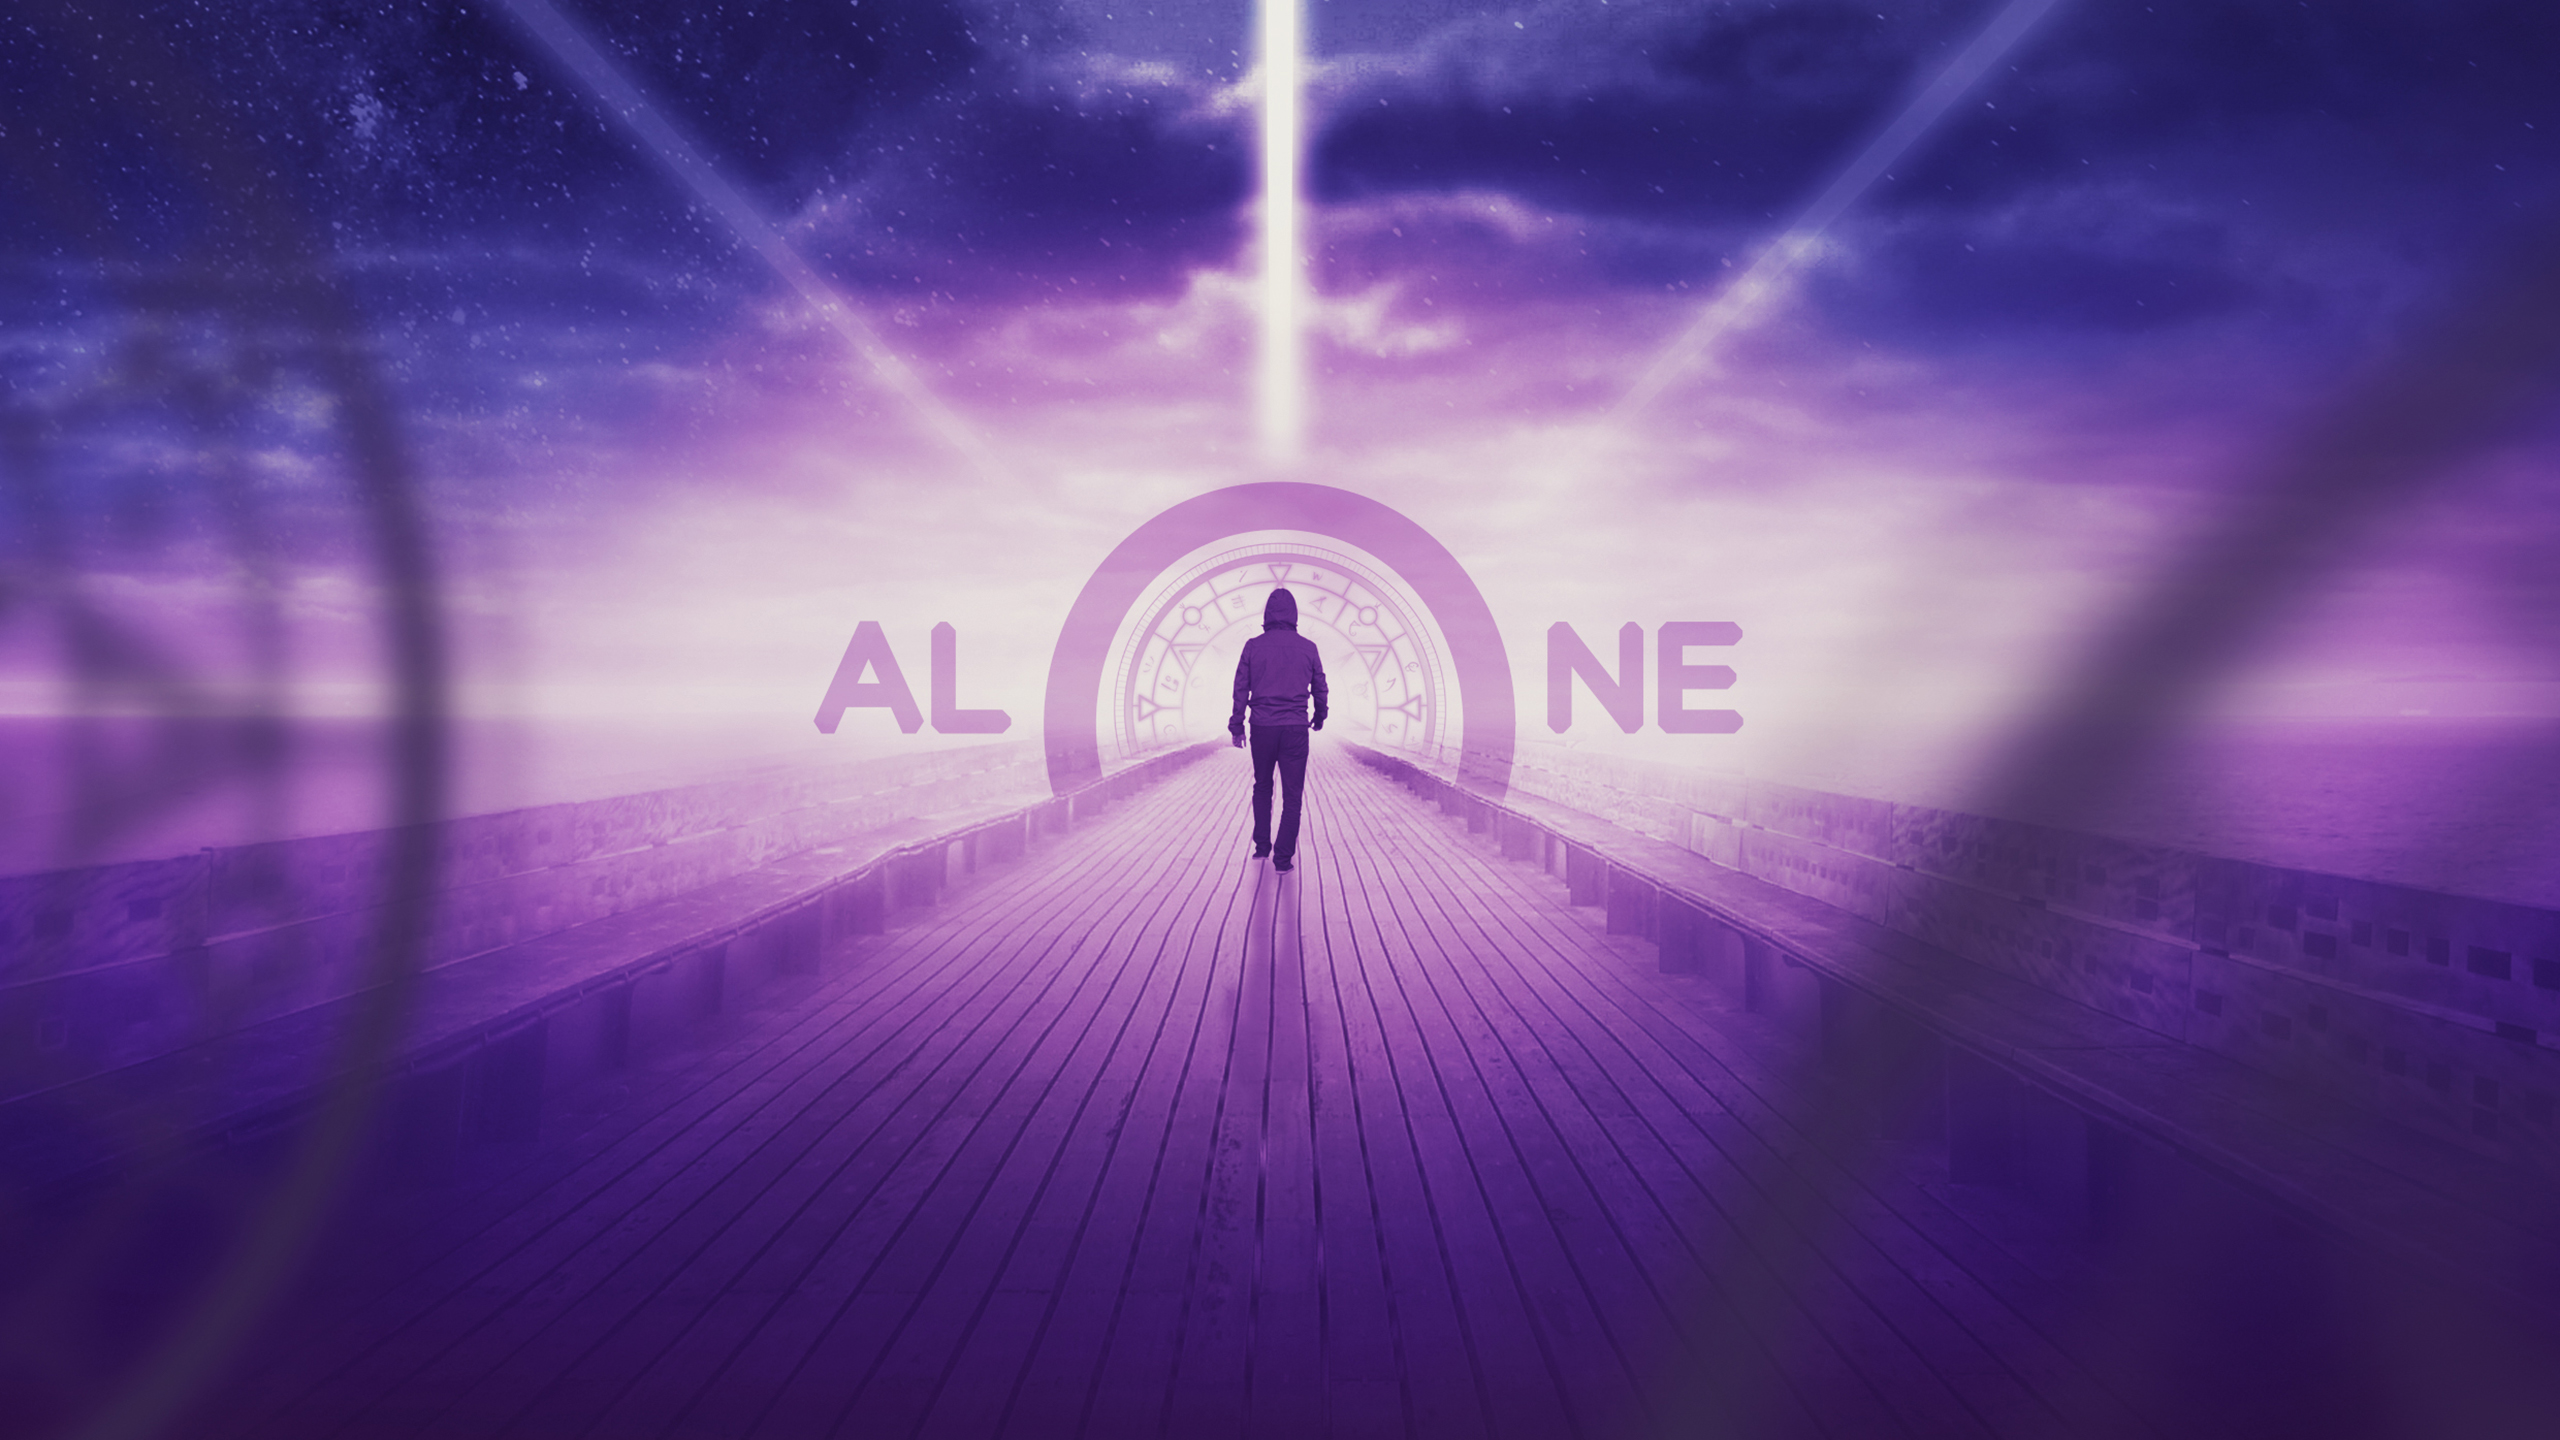 Alone Wallpapers